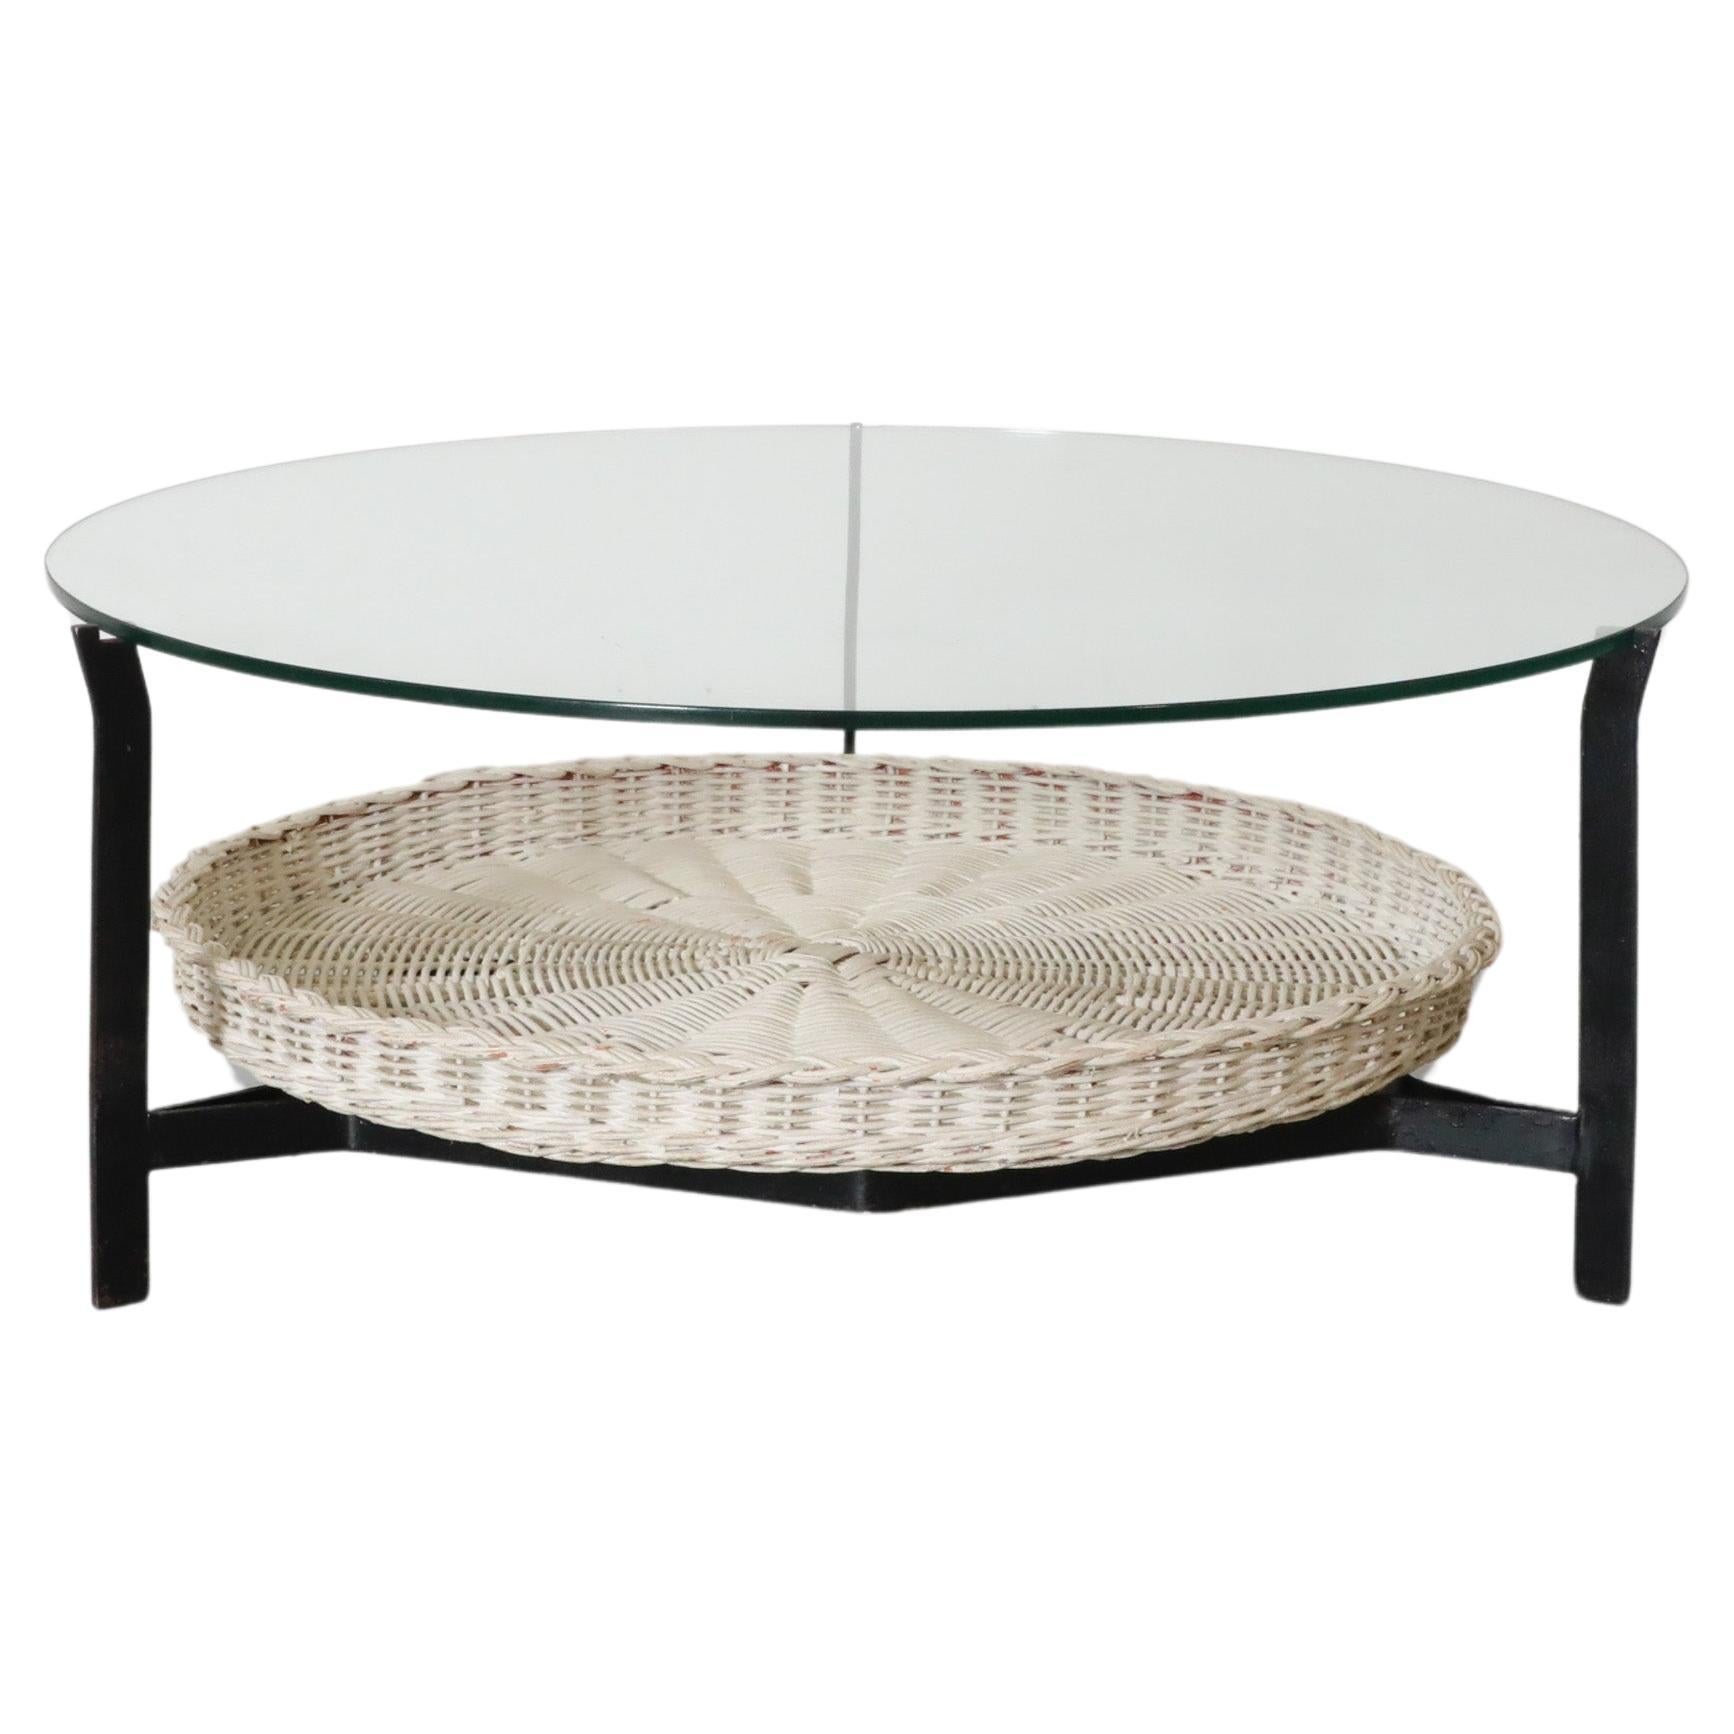 Gebr. Jonkers Modernist Glass Coffee Table with White Basket For Sale